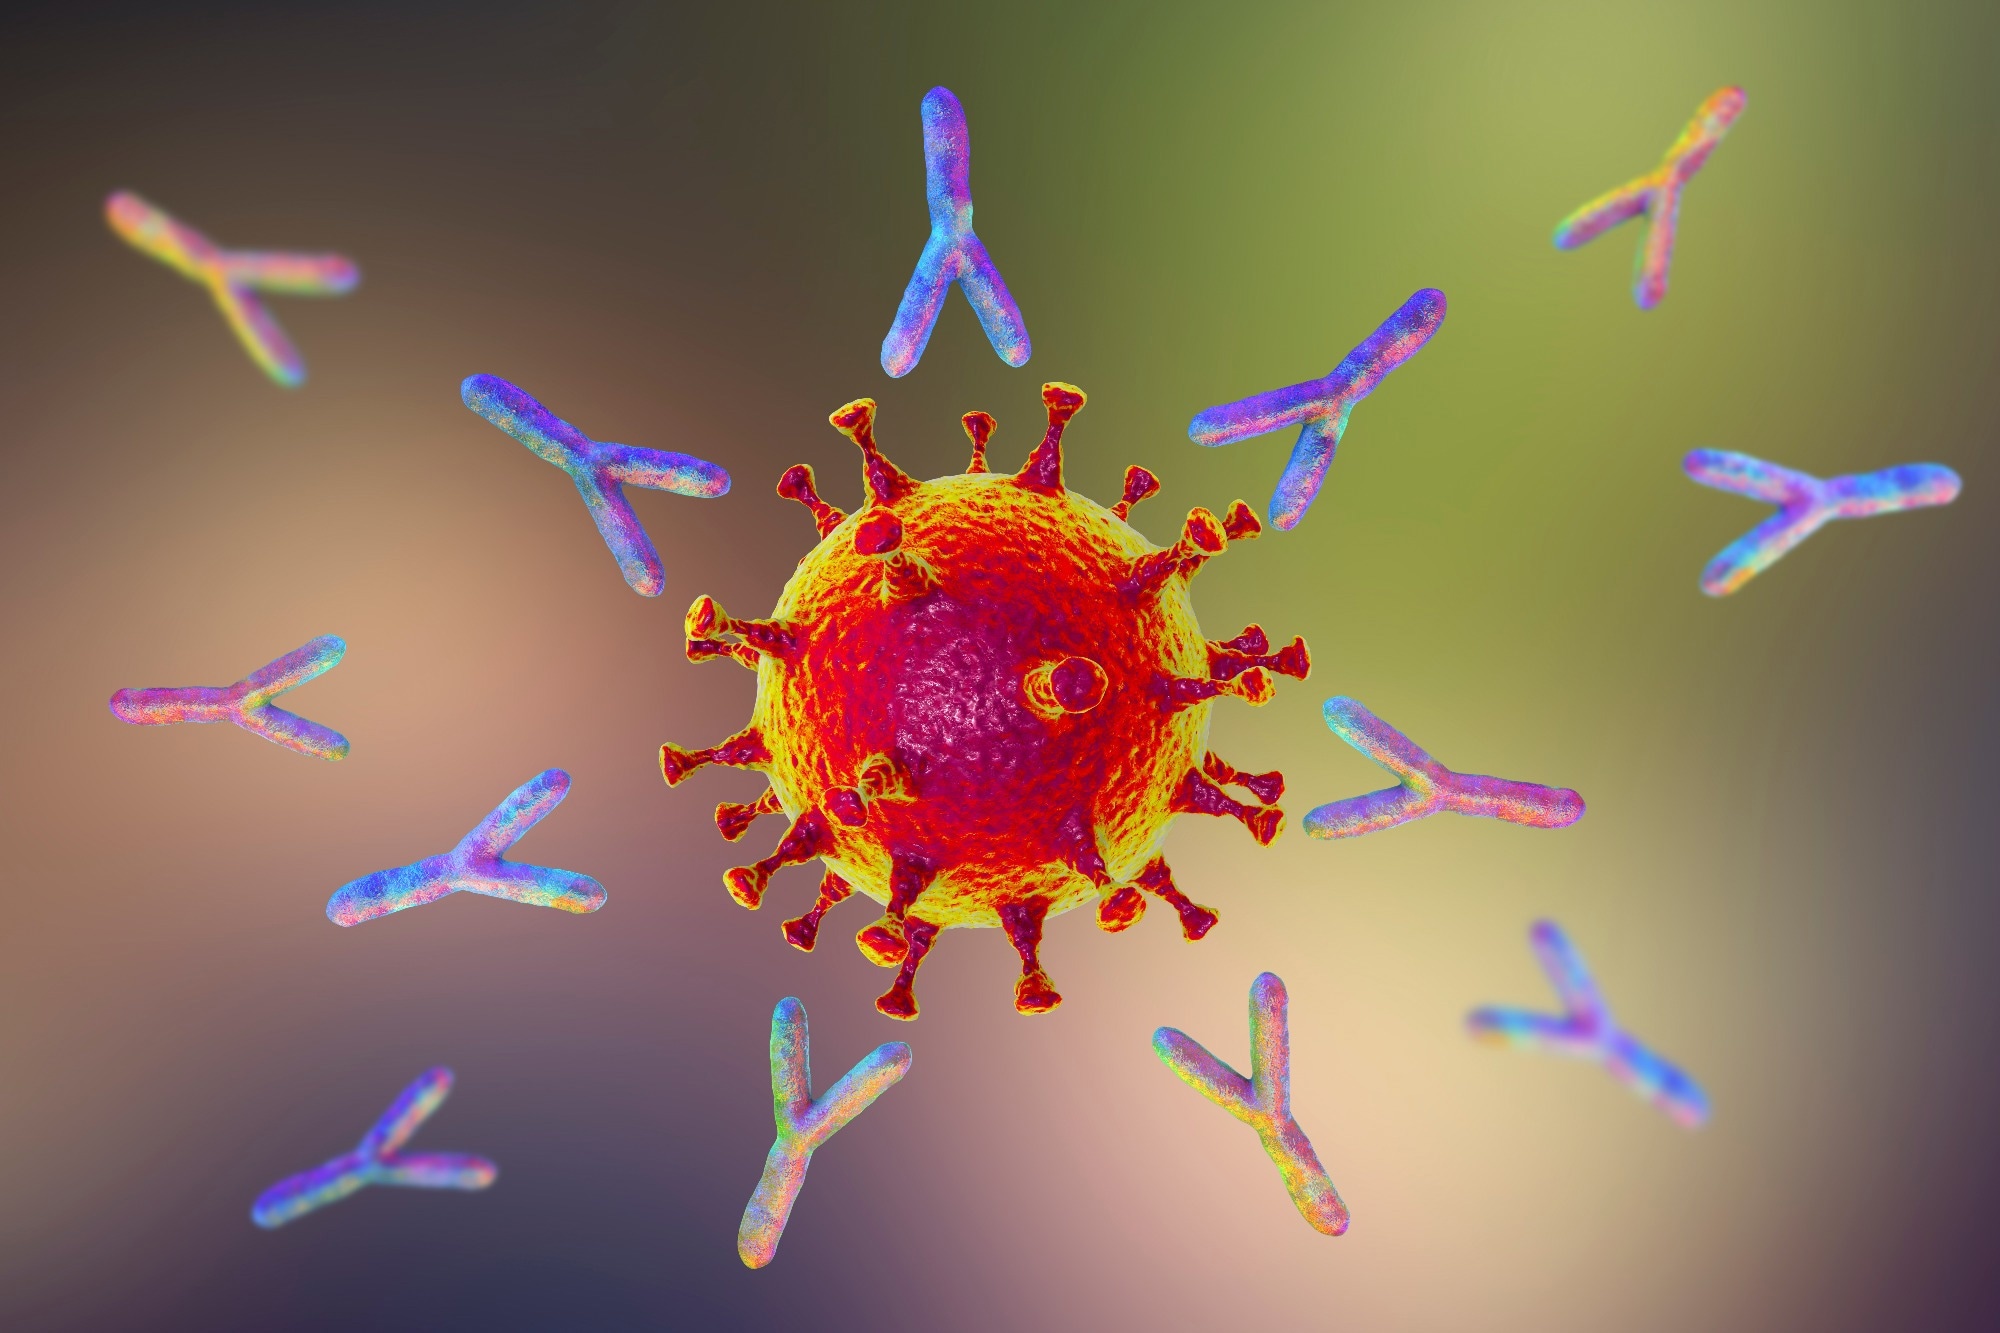 Study: SARS-CoV-2-infection- and vaccine-induced antibody responses are long lasting with an initial waning phase followed by a stabilization phase. Kateryna Kon / Shutterstock